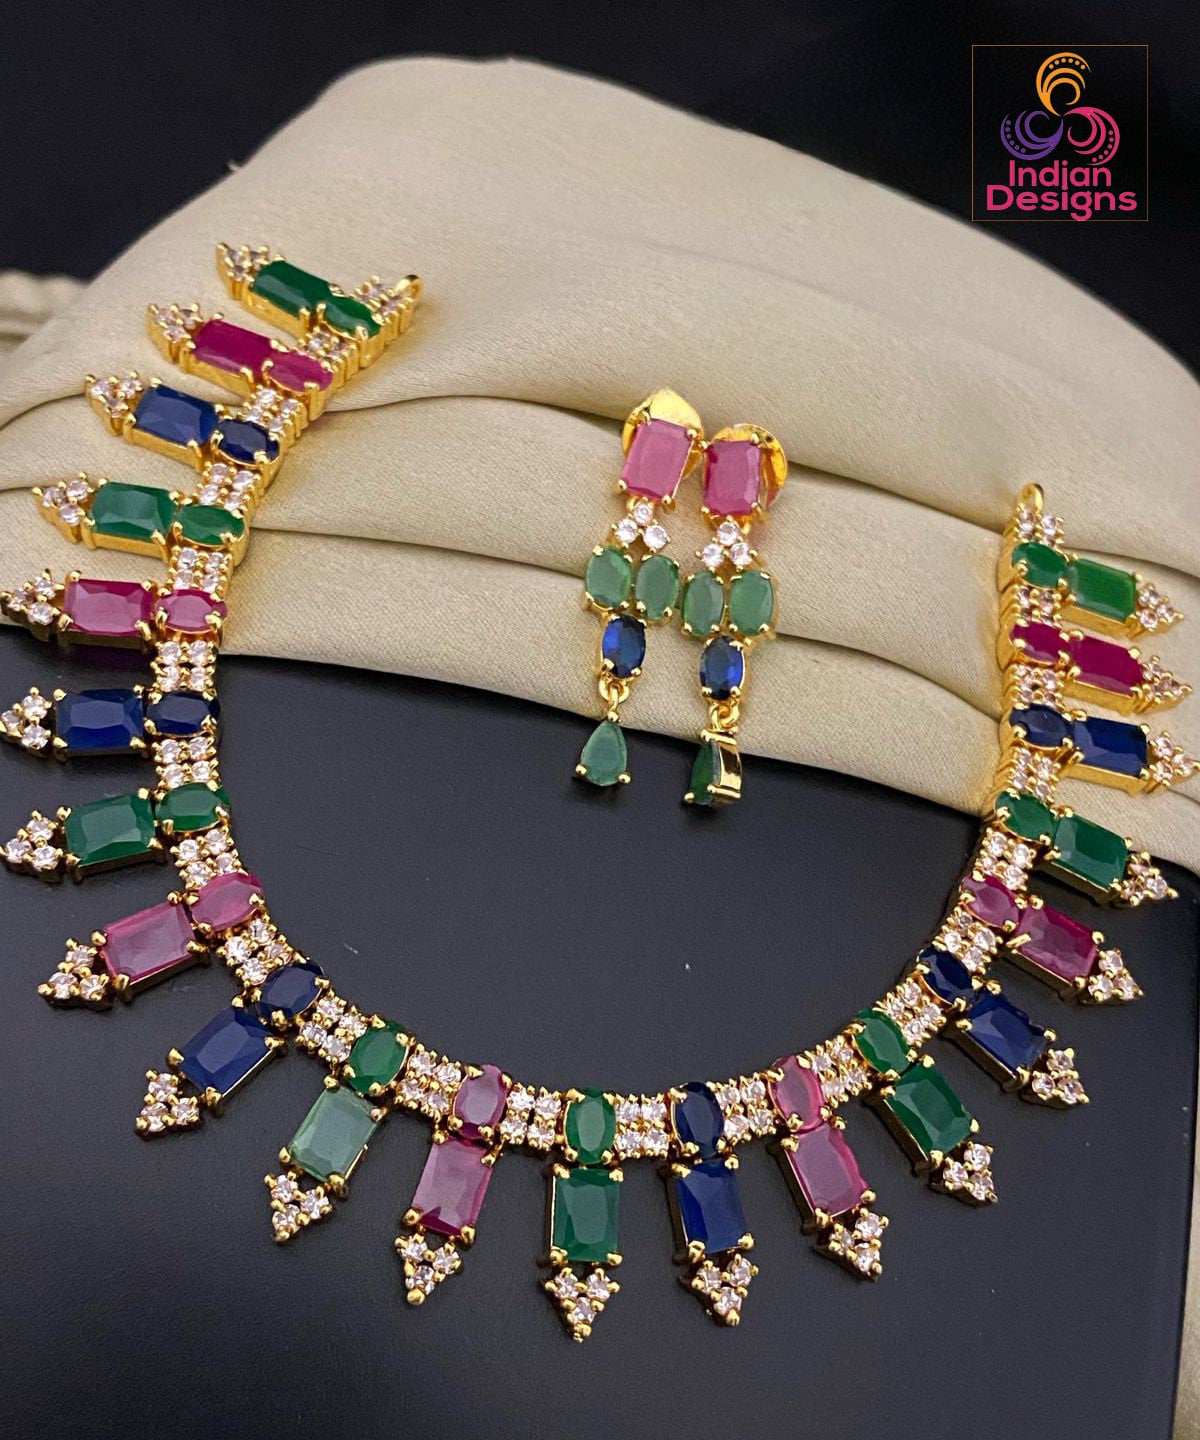 Gold plated Cz American Diamond ruby, Emerald and Blue Sapphire stones necklace earrings Indian Jewelry | AD stones Simple gold choker set